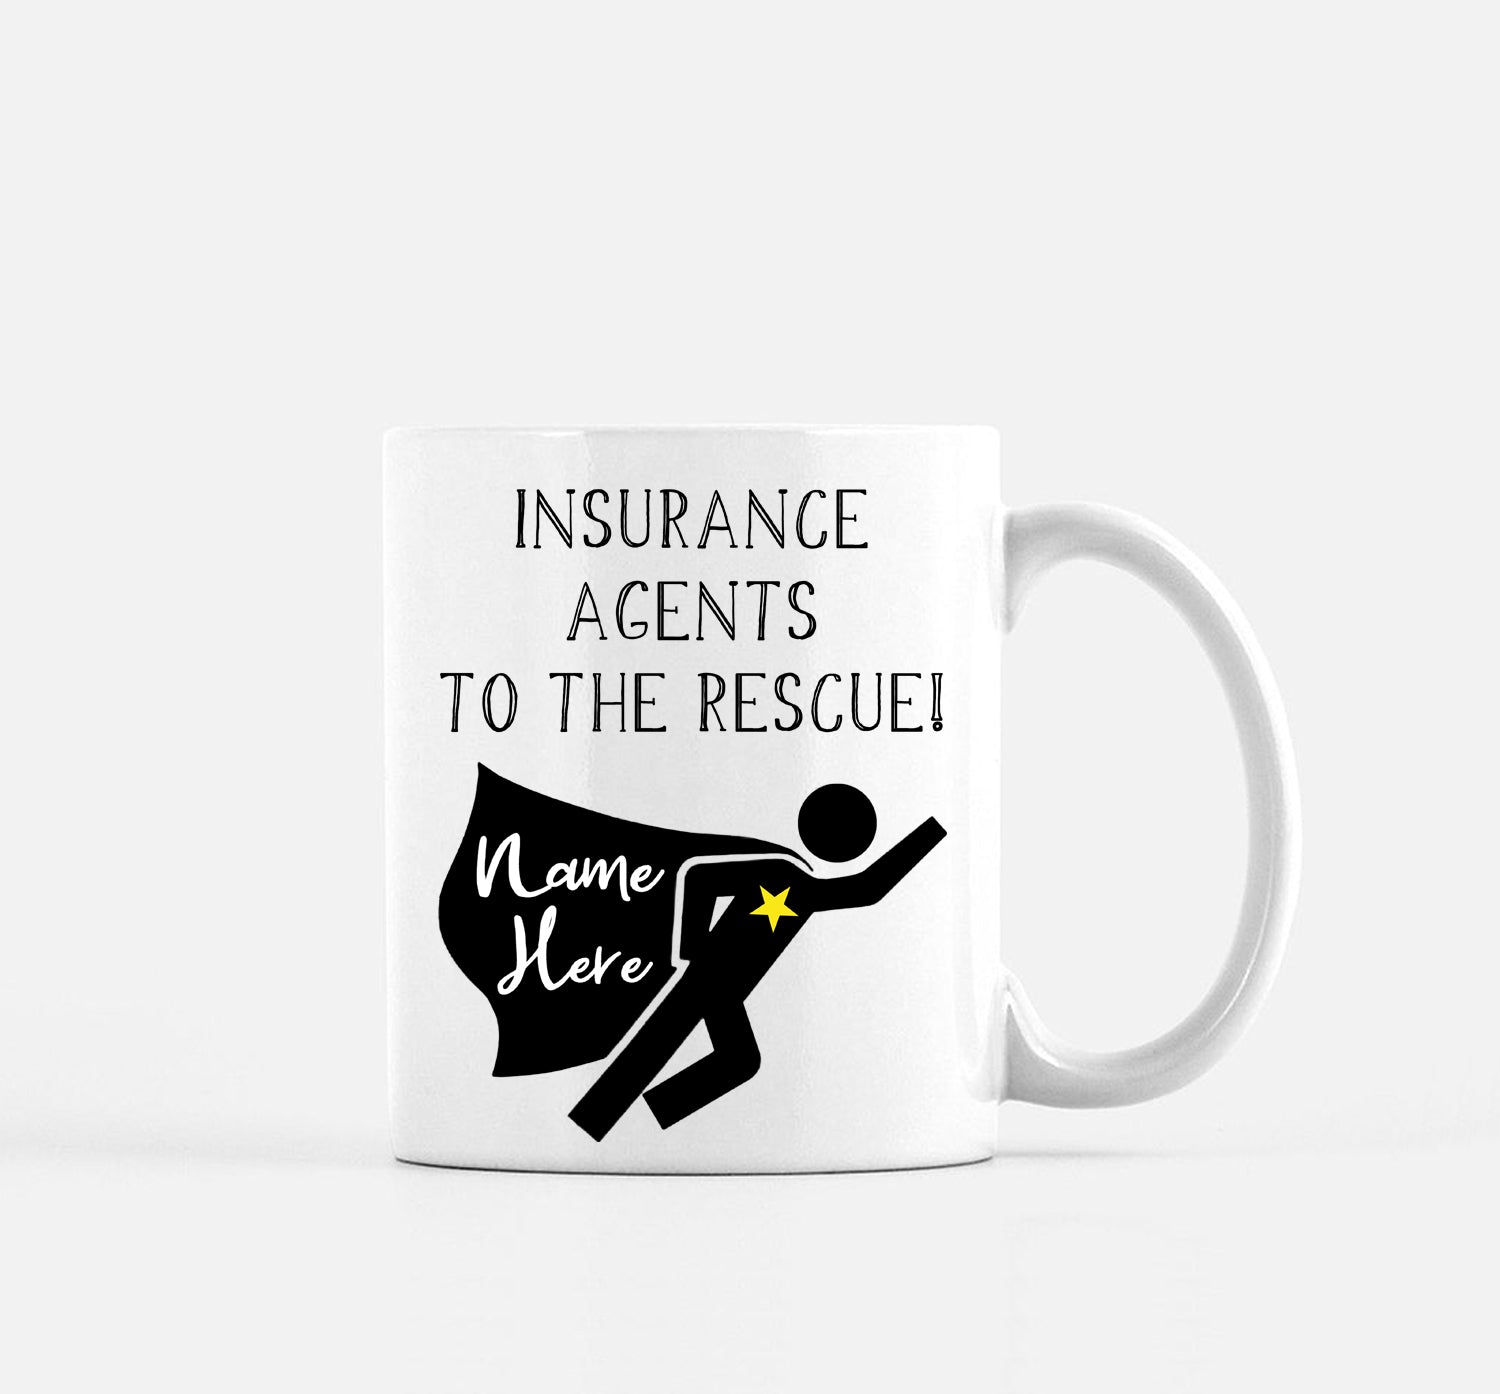 Insurance Agents Mug Personalized Gift by The Office Art Guy